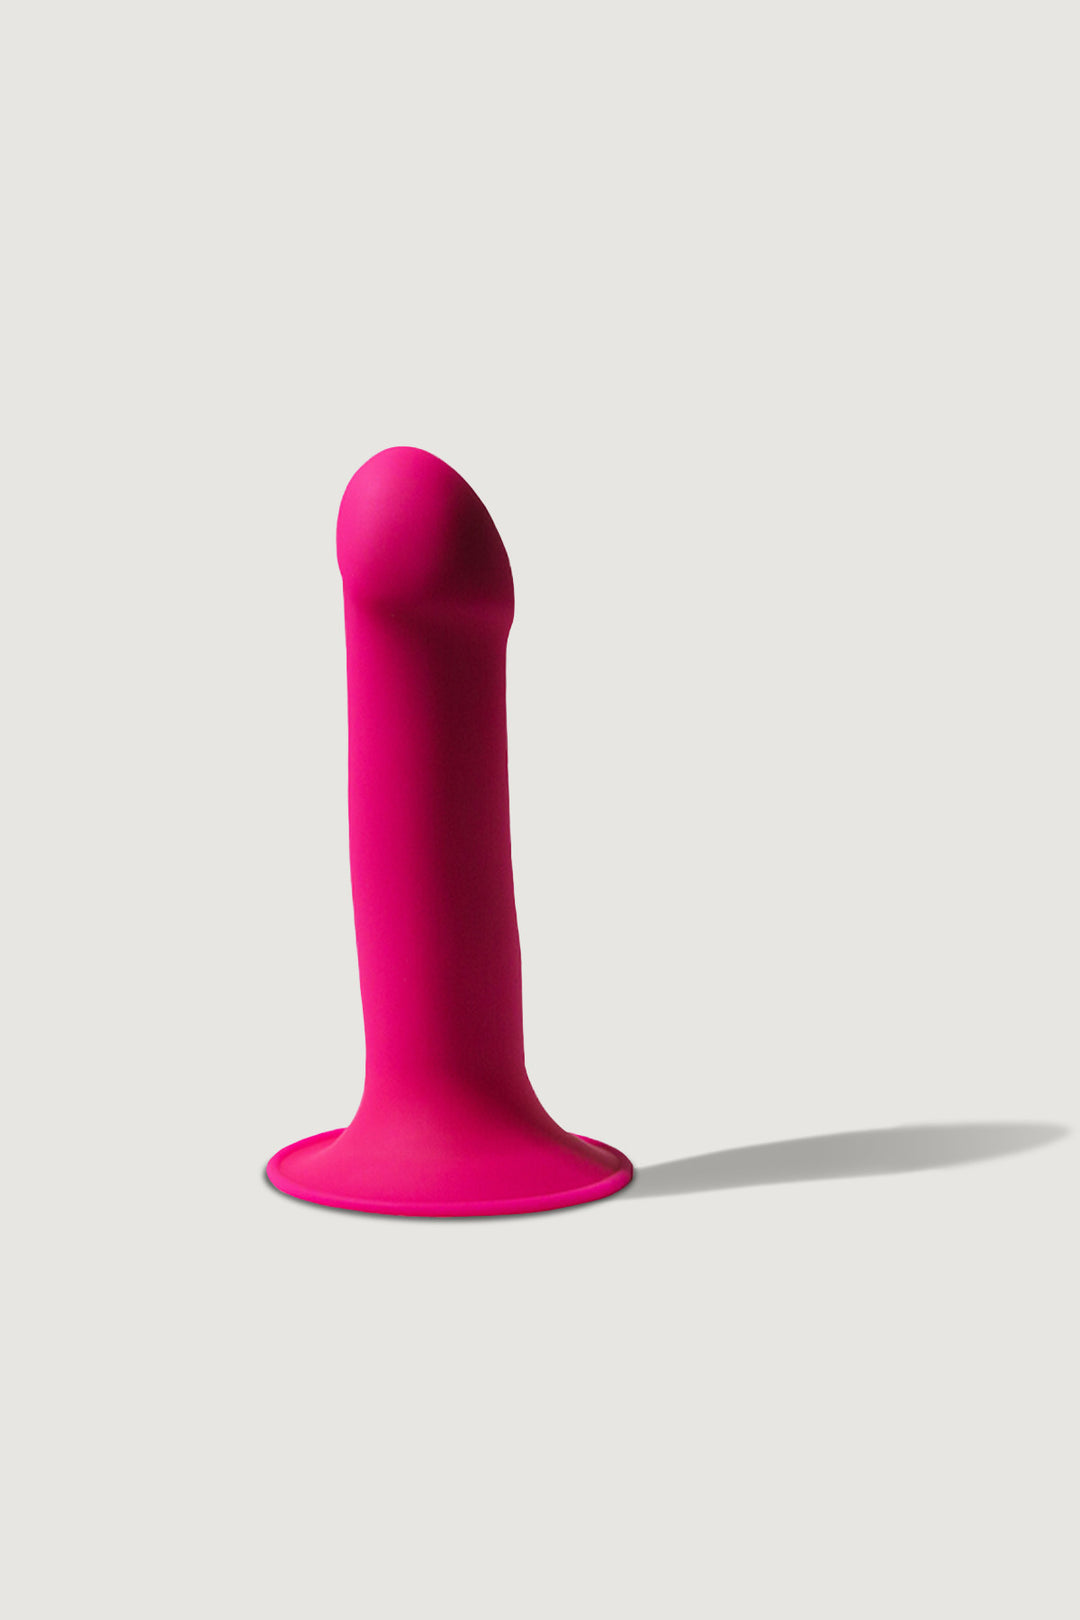 Dildo with suction cup Hitsens Fuchsia - 16.8